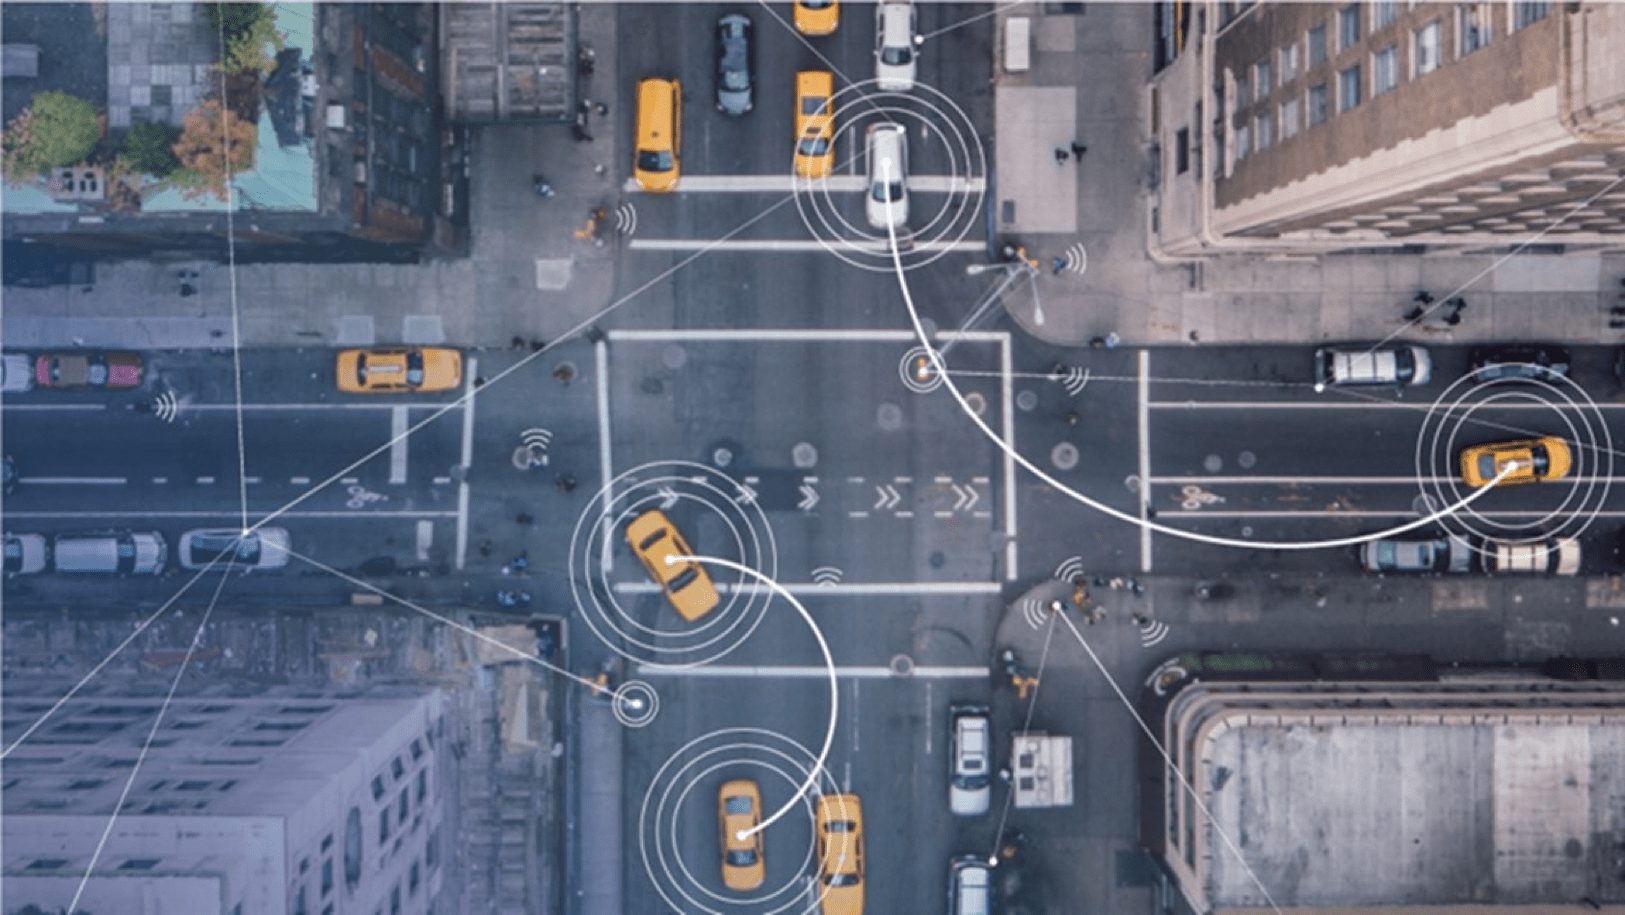 Intelligent Connectivity - Combination of 5G and AI Driver Assistance Traffic Monitoring Potential - Intel